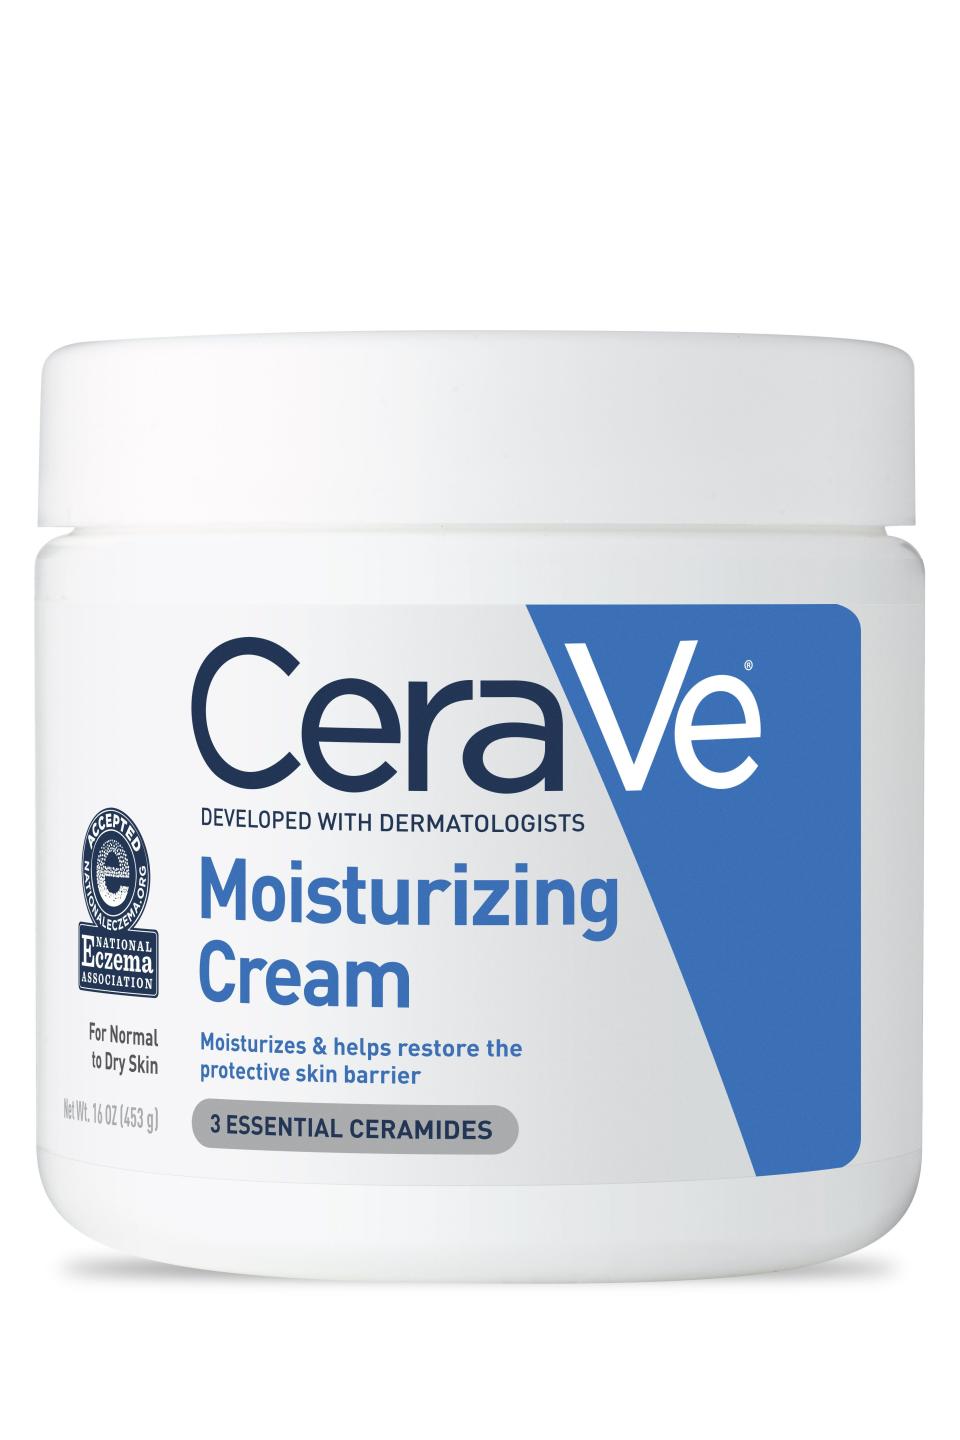 11) CeraVe Moisturizing Cream for Normal to Dry Skin